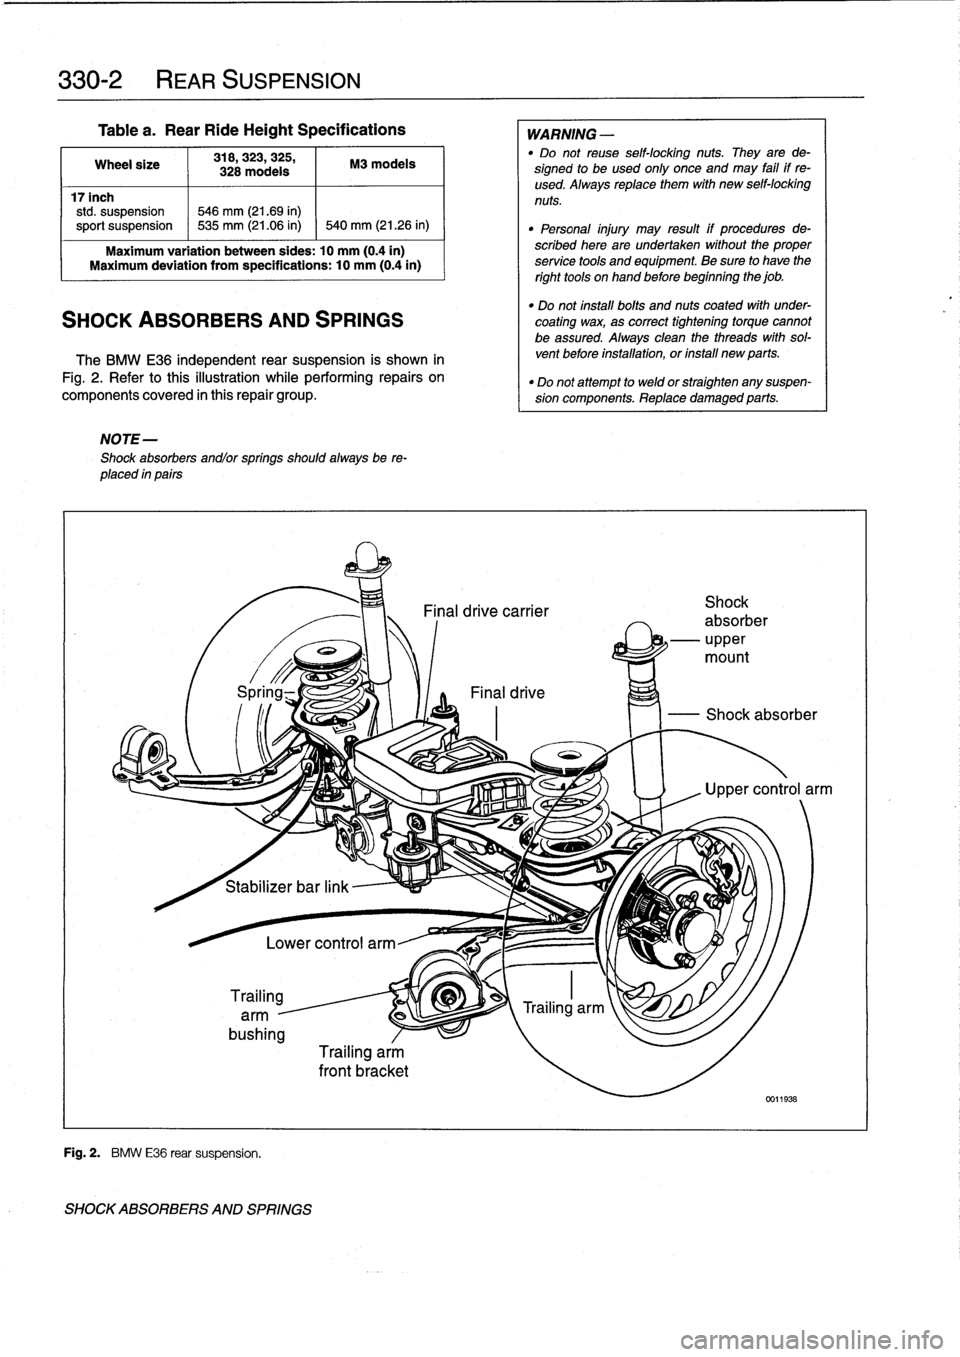 BMW 318i 1997 E36 Workshop Manual 
330-2

	

REAR
SUSPENSION

Table
a
.
Rear
RideHeight
Specifications

Wheel
size

	

318,323,
325,

	

M3
modeis
328
modeis

17inch
std
.
suspension

	

546
mm
(21.69
in)
sport
suspension

	

~
535
mm